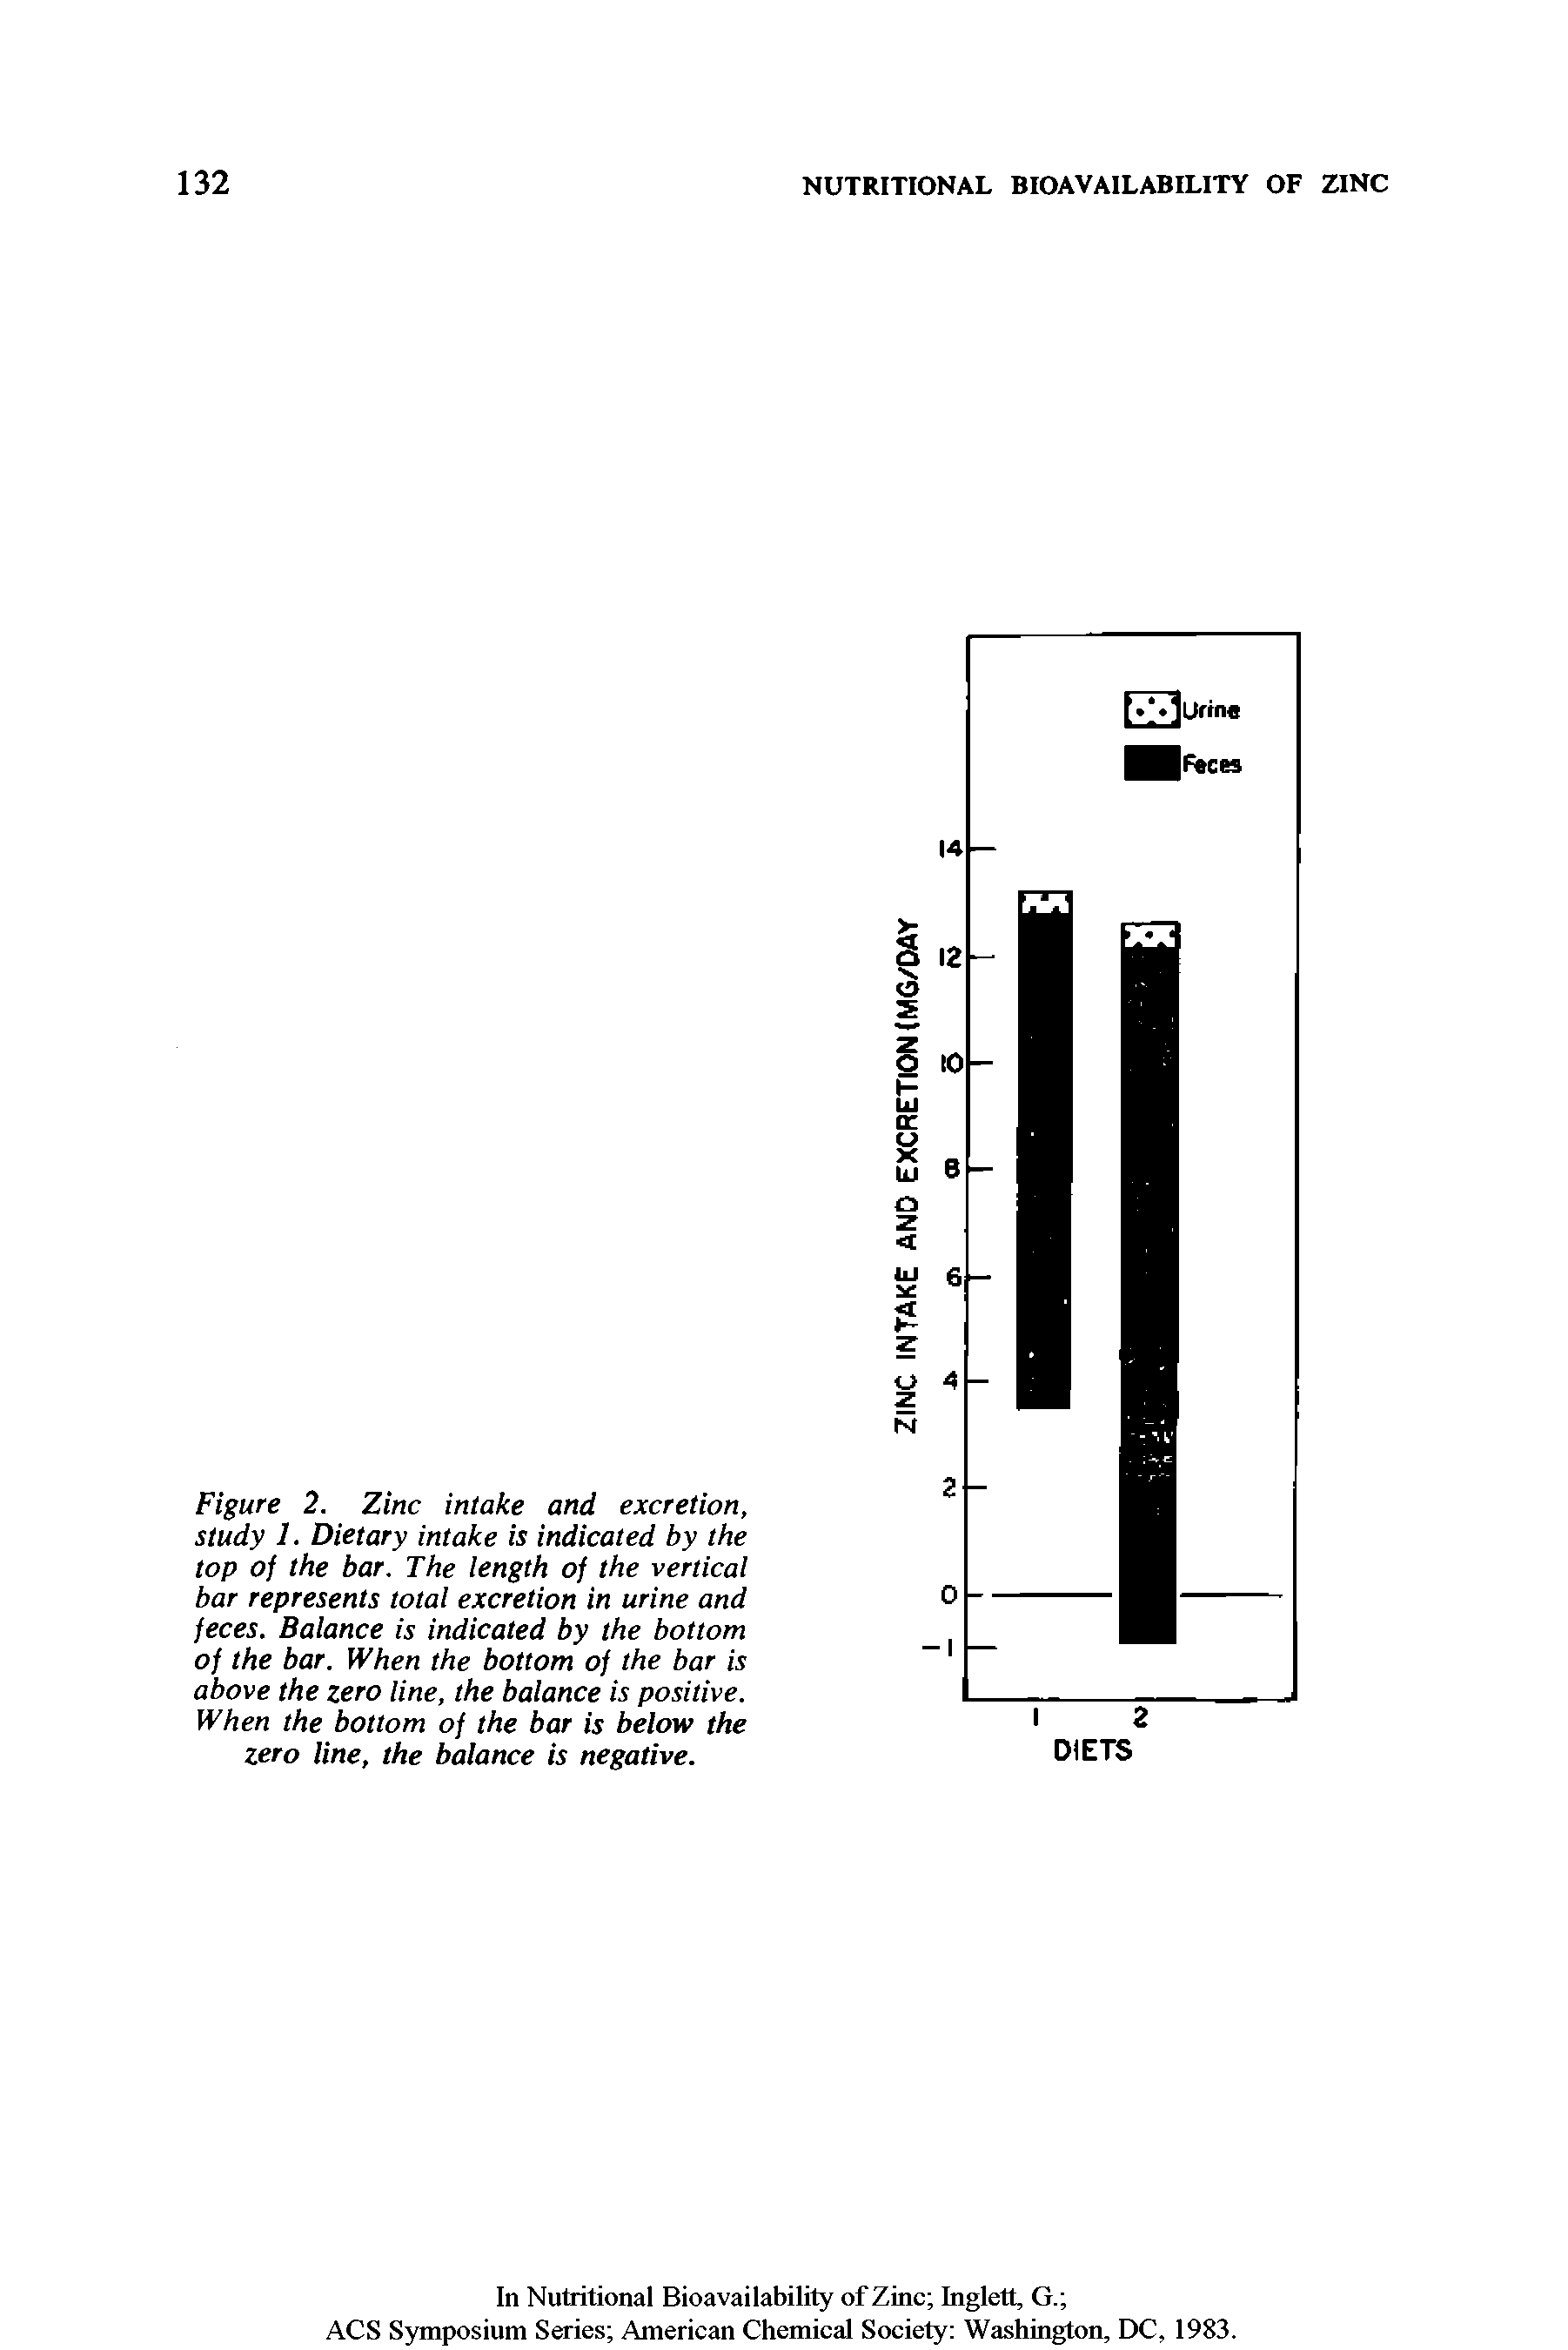 Figure 2. Zinc intake and excretion, study 1. Dietary intake is indicated by the top of the bar. The length of the vertical bar represents total excretion in urine and feces. Balance is indicated by the bottom of the bar. When the bottom of the bar is above the zero line, the balance is positive. When the bottom of the bar is below the zero line, the balance is negative.